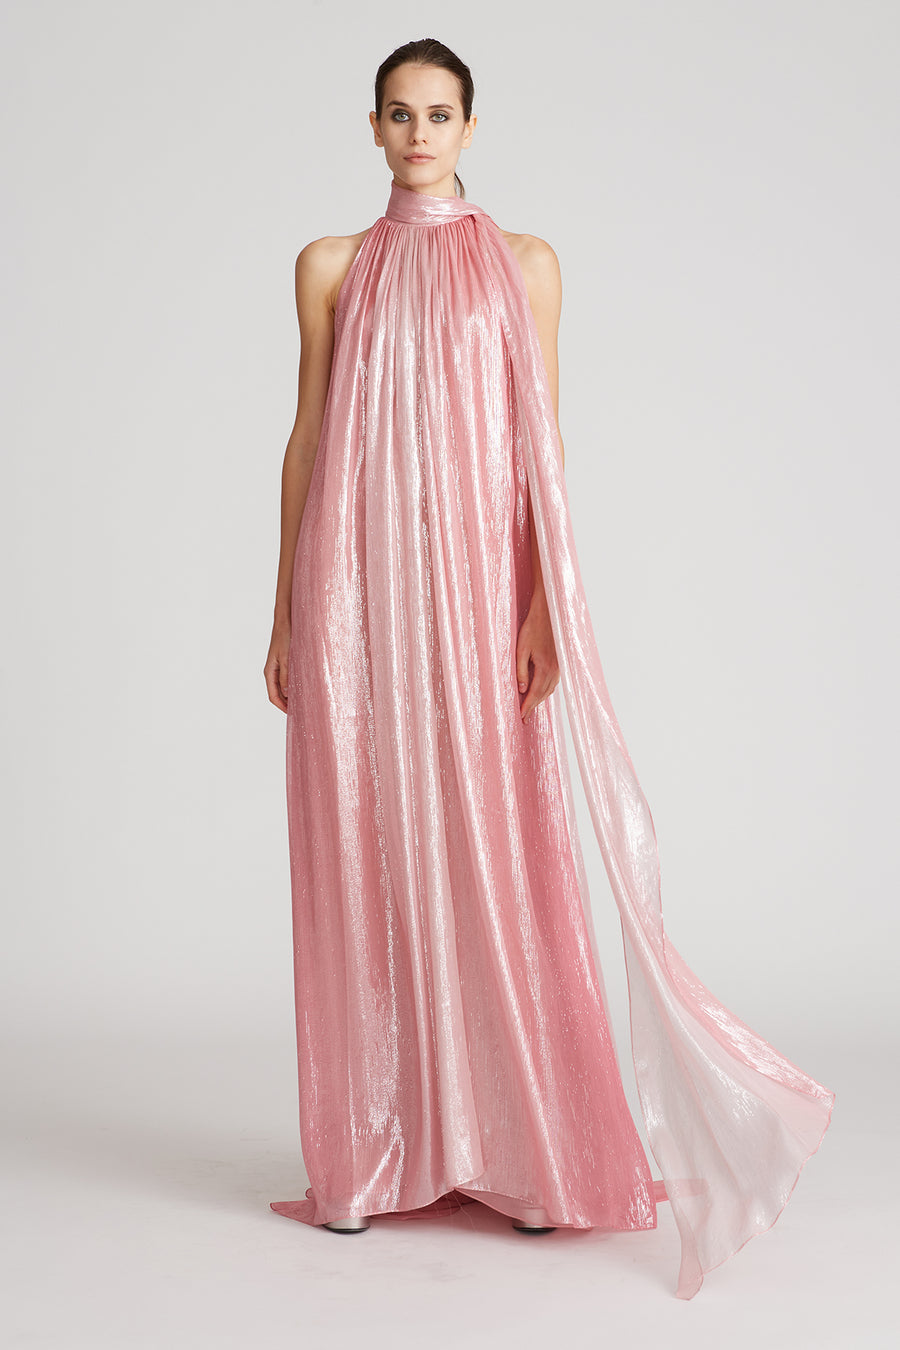 Tay Lurex Chiffon Ombre Gown